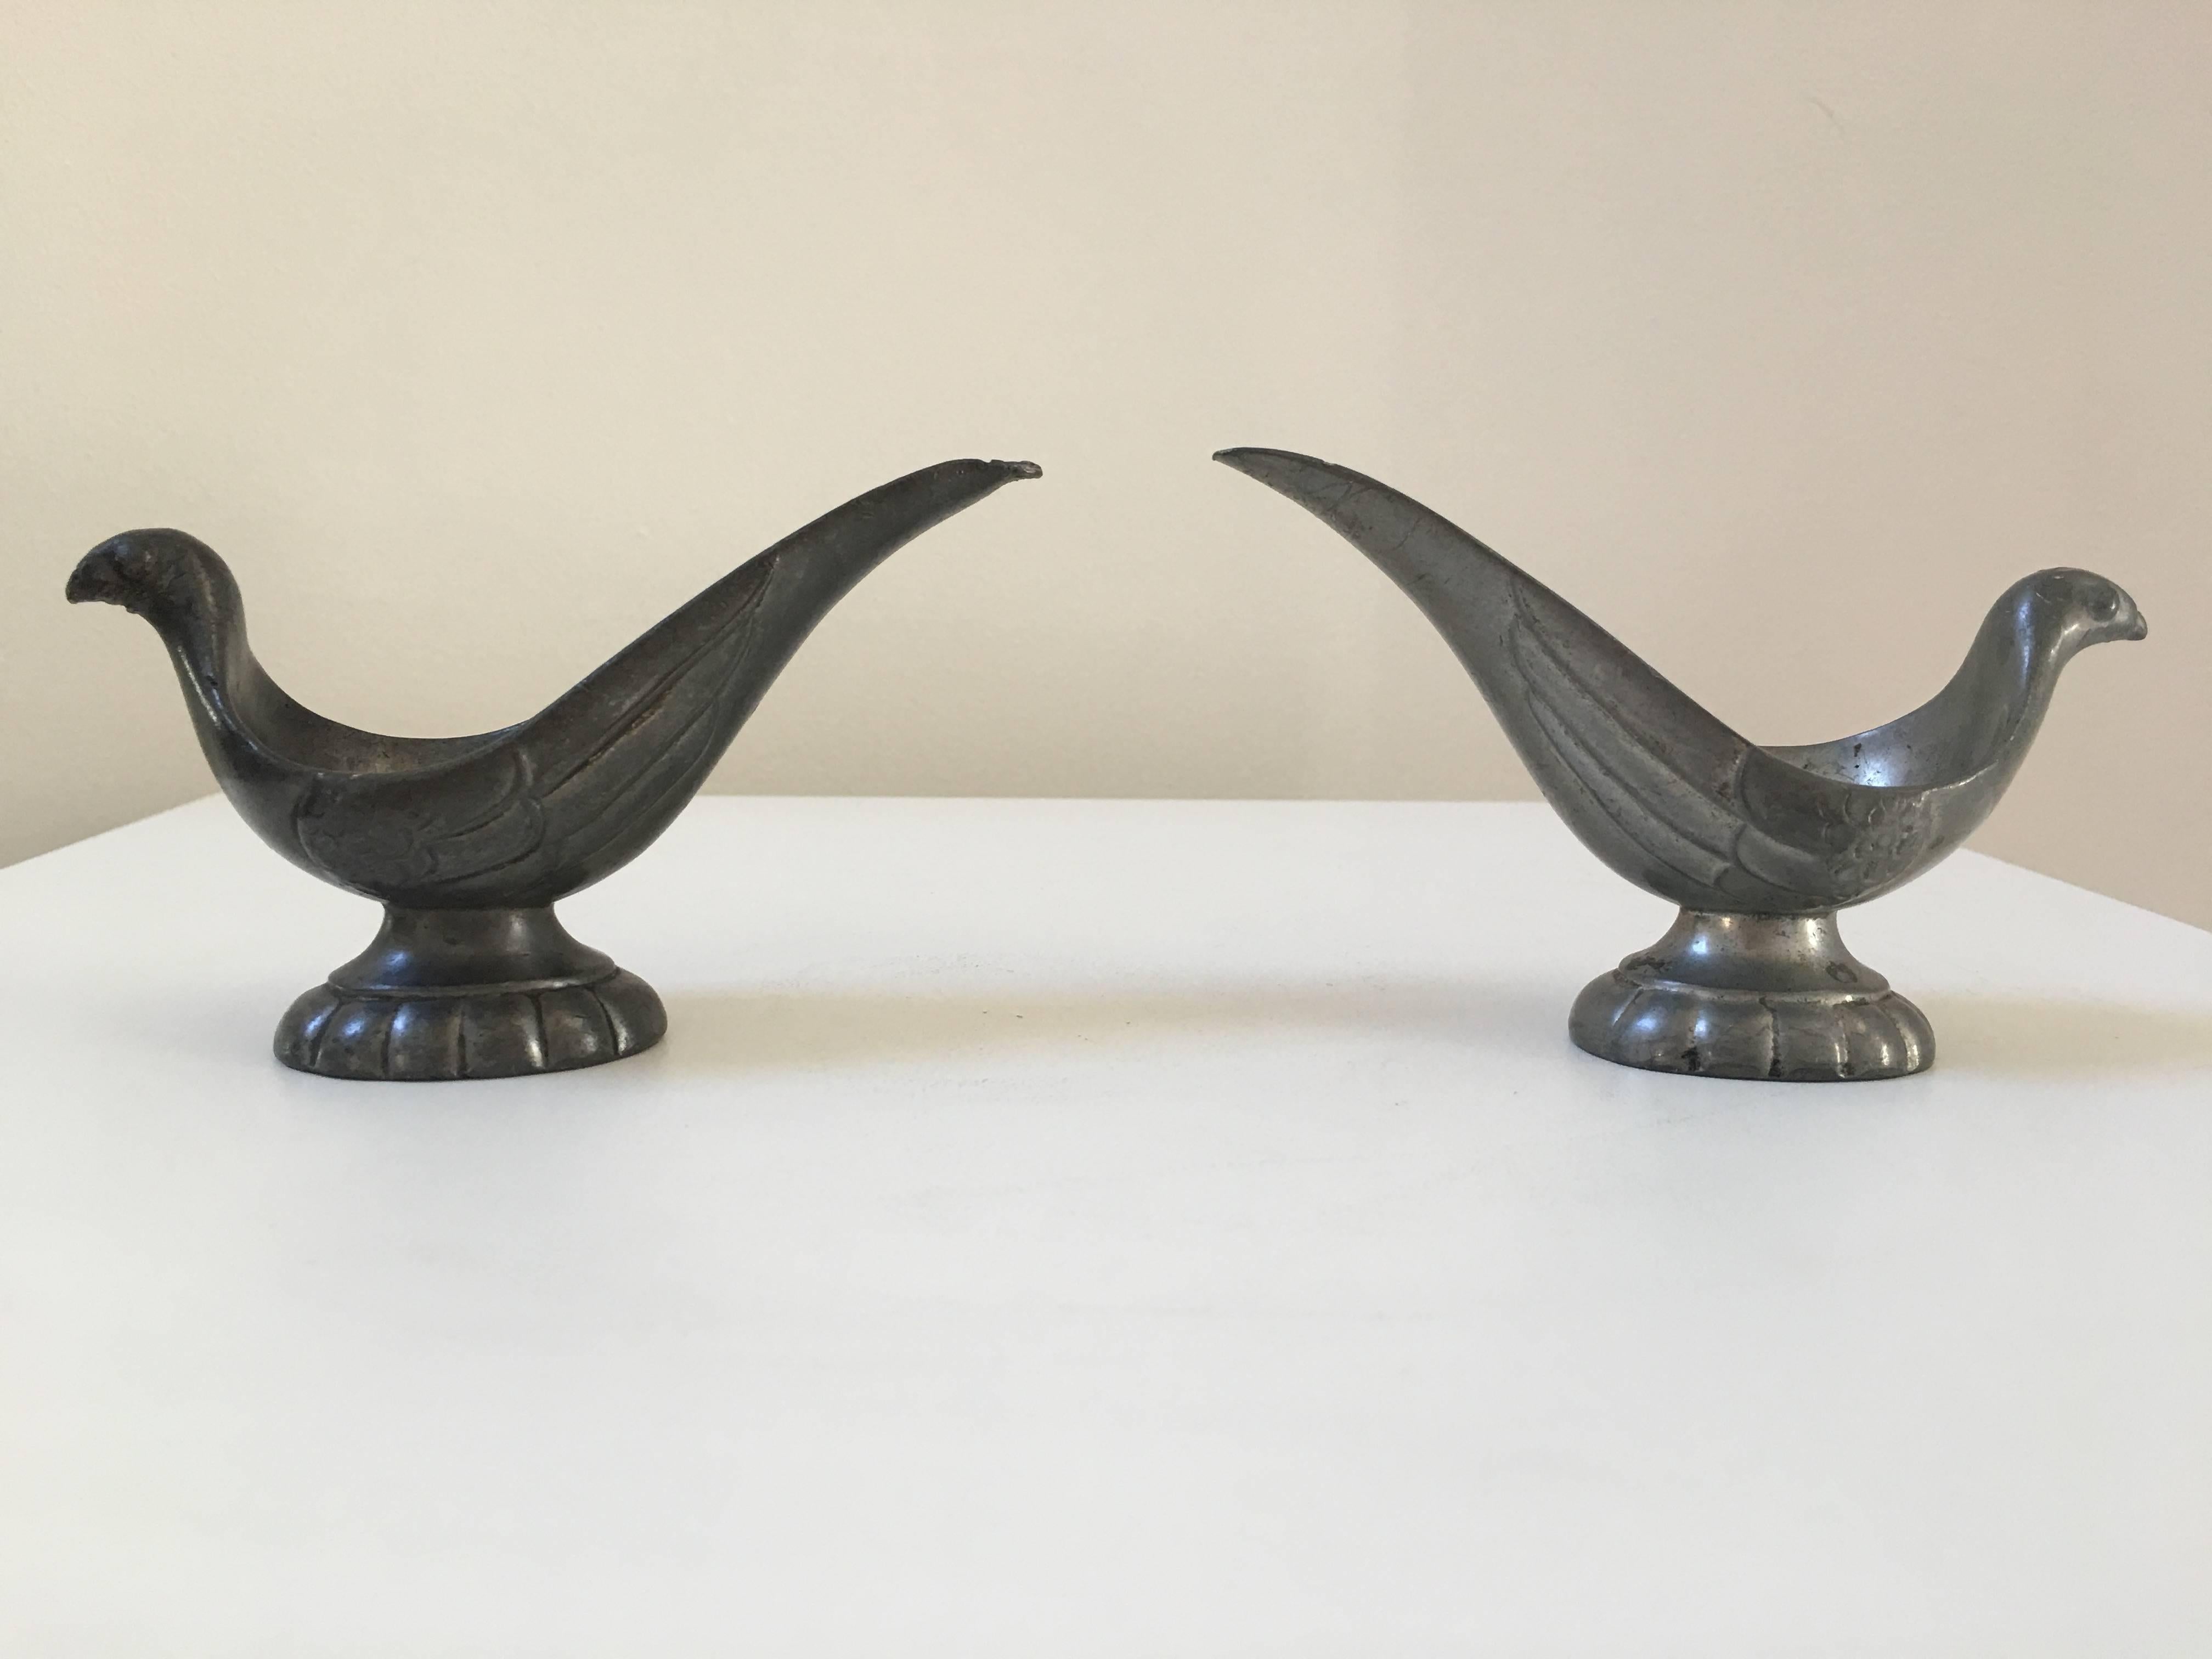 Whimsical and sculptural pair of pipe holders in the form of stylized birds. Made of pewter, both pipe holders are signed. One is slightly darker than the other.